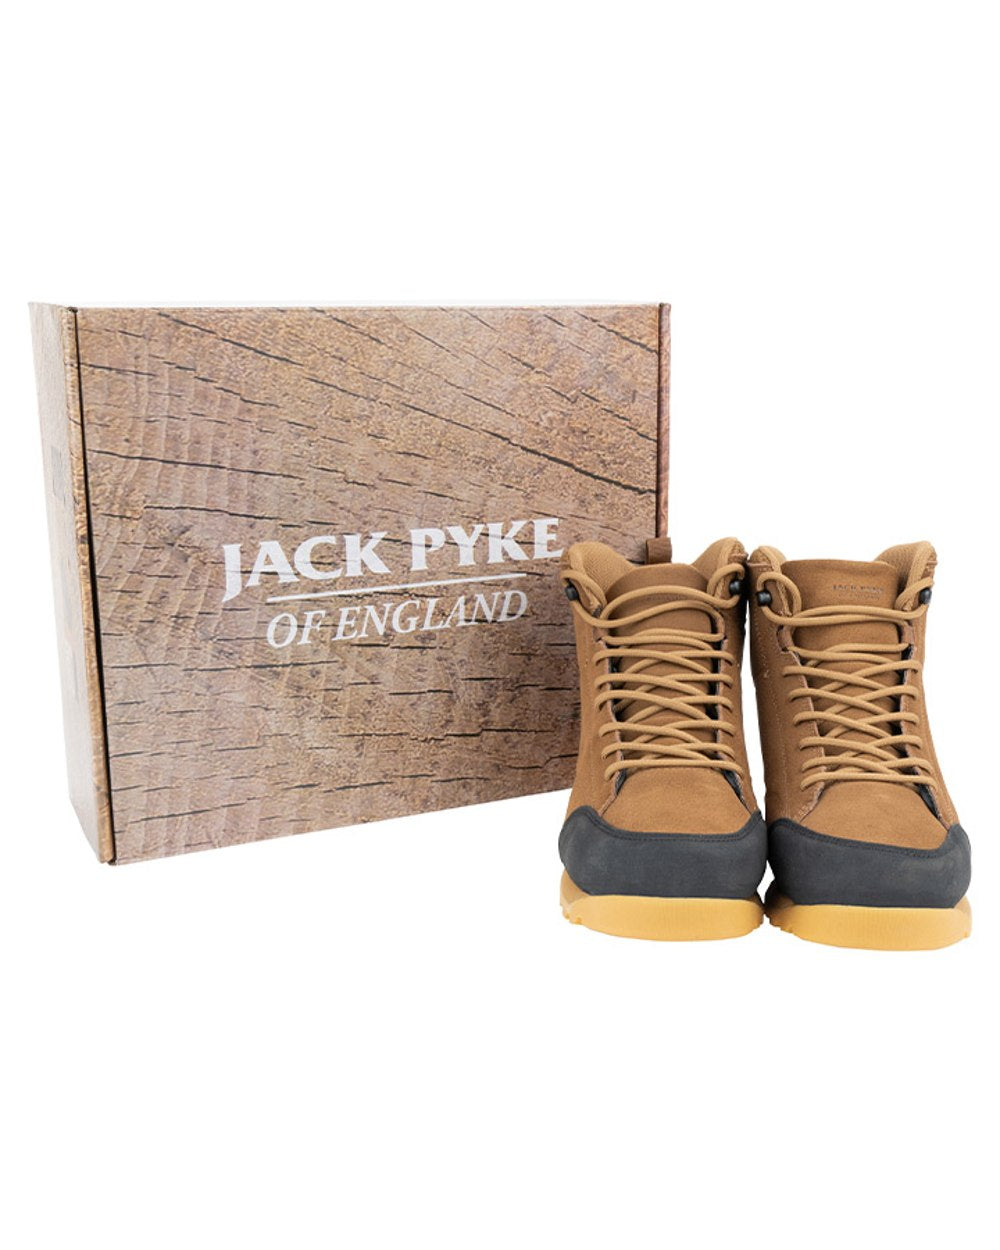 Brown coloured Jack Pyke Lowland Boots on white background